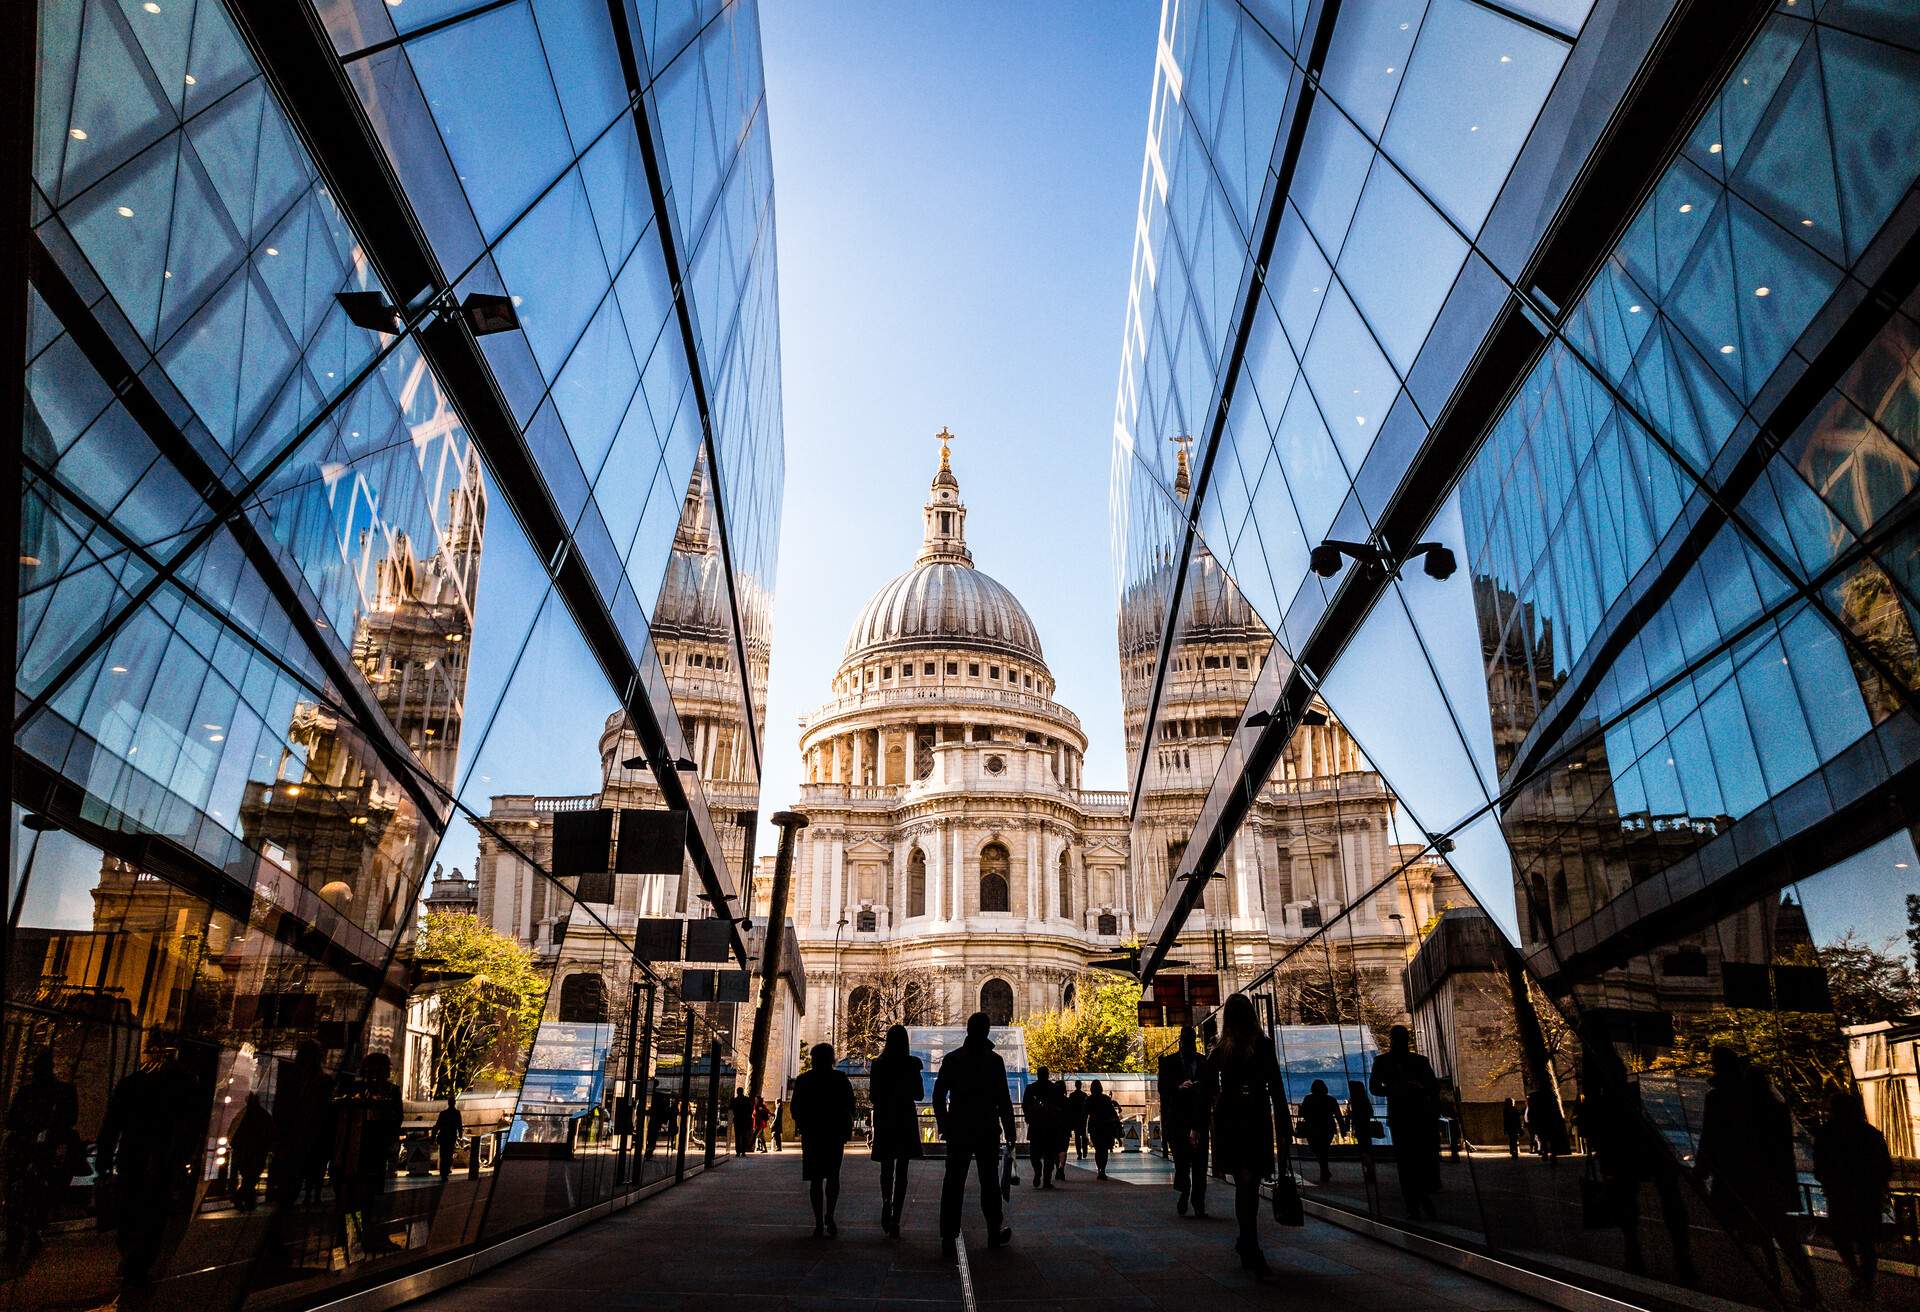 Color image depicting a crowd of people, thrown into silhouette and therefore unrecognisable, walking alongside modern futuristic architecture of glass and steel. In the distance we can see the ancient and iconic dome of St Paul's cathedral. Room for copy space.